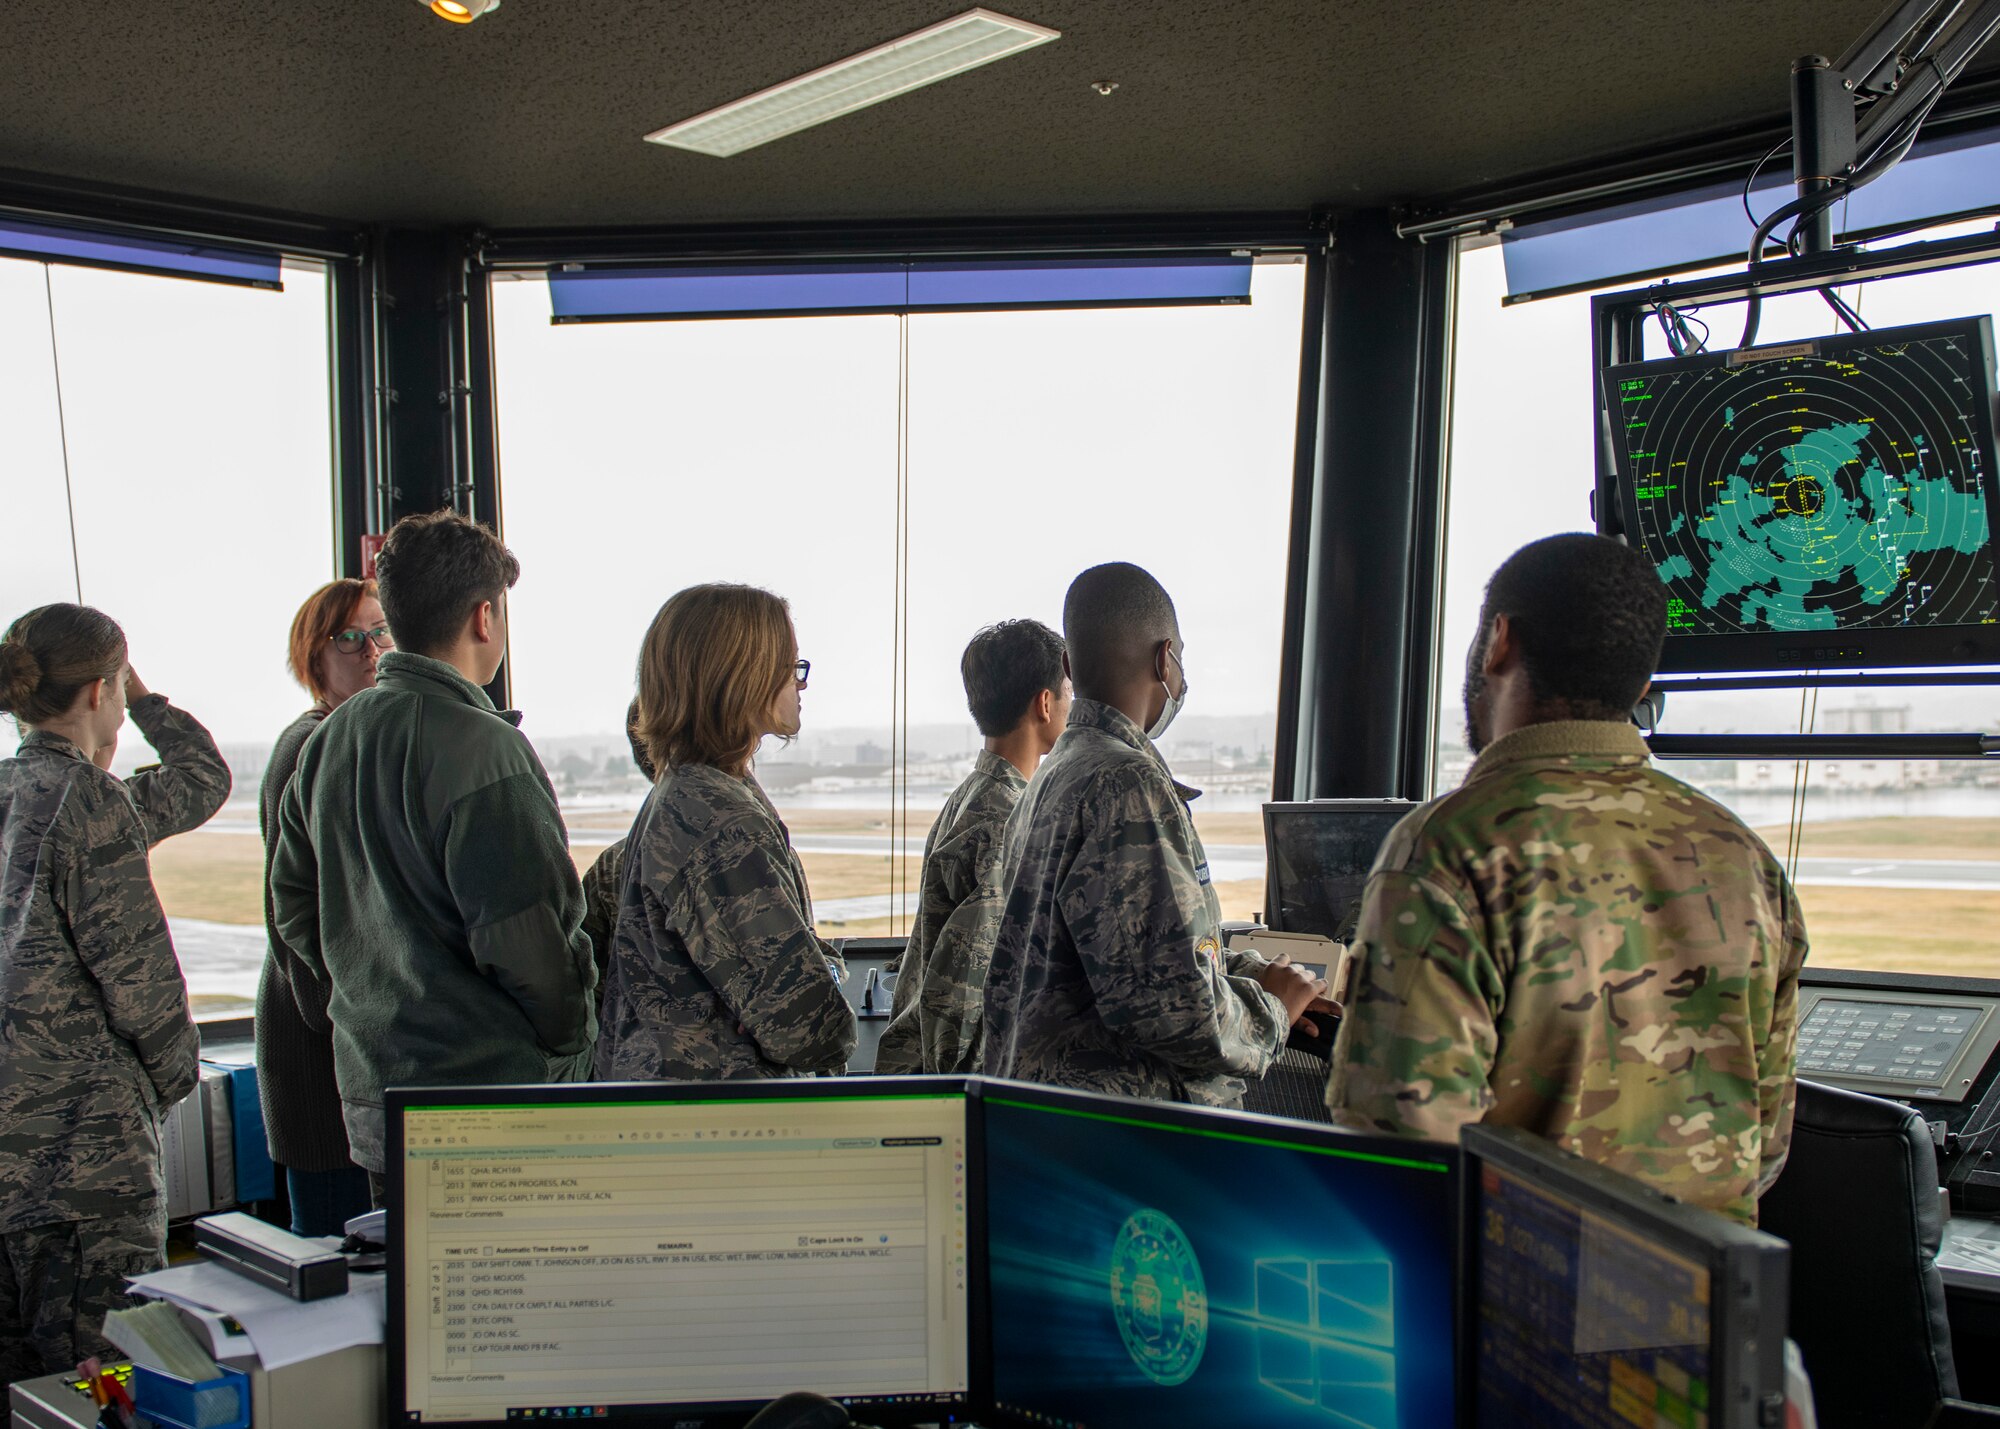 a soldier points out landmarks for a crowd of kids from the window of an air traffic control tower